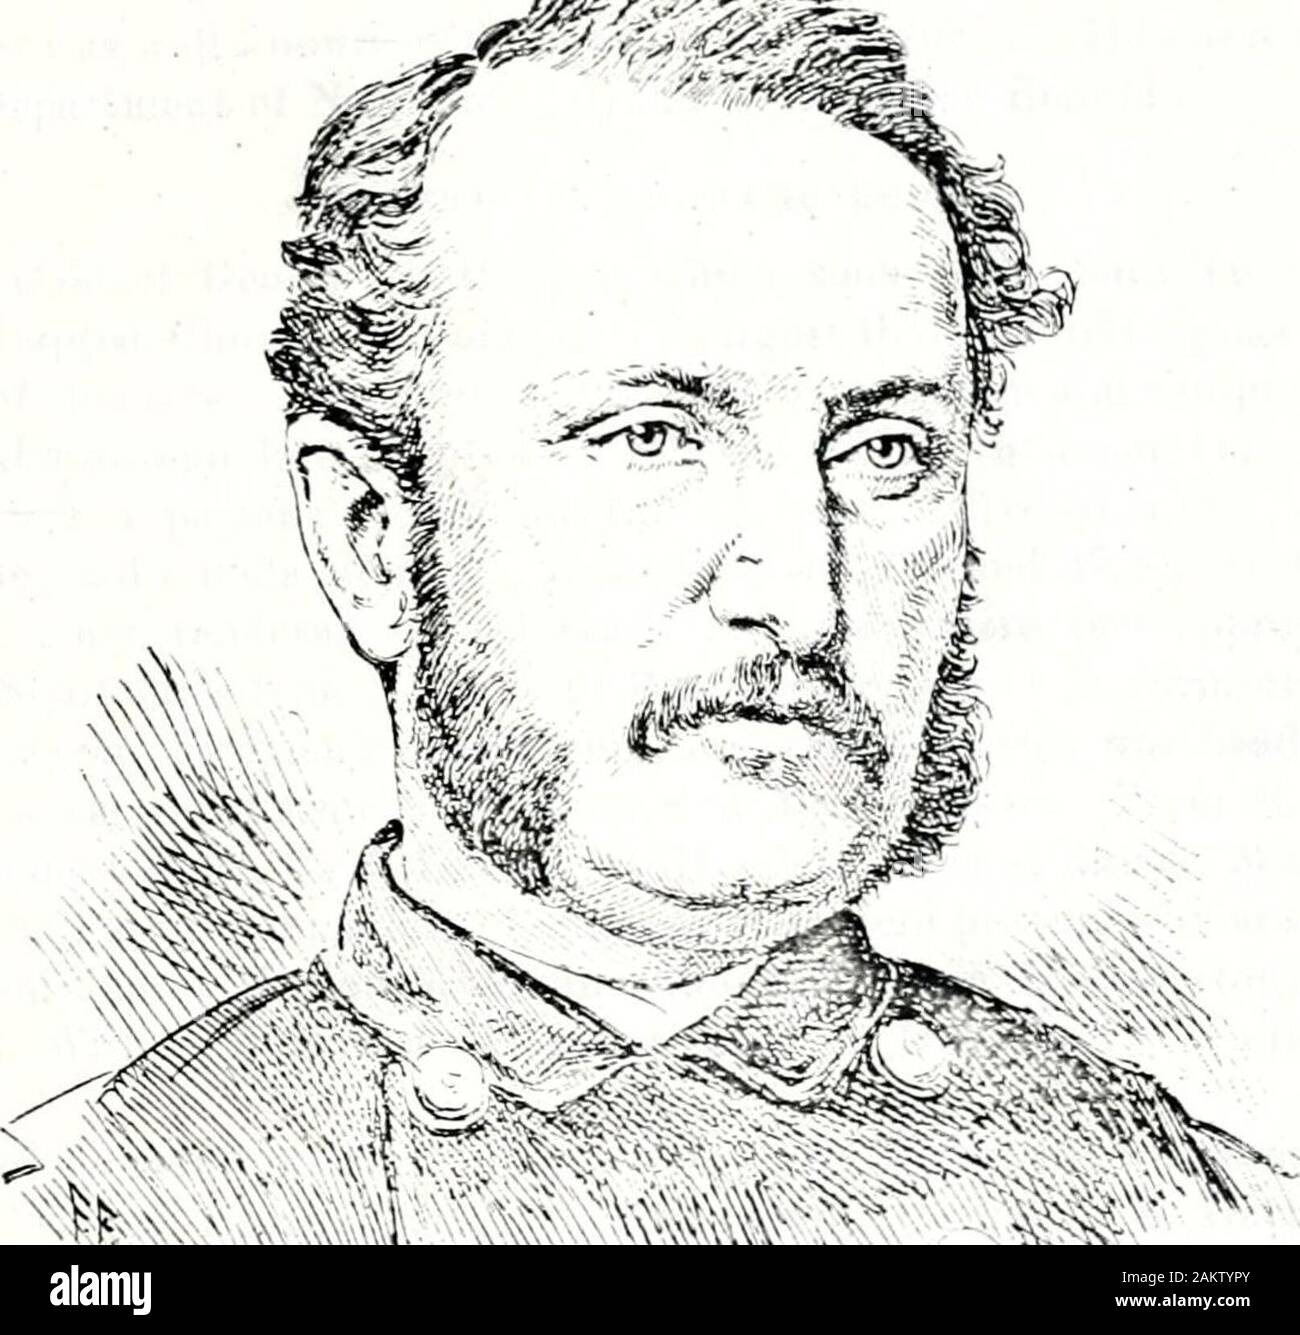 A complete military history and record of the 108th Regiment N.Yvols., from 1862 to 1894Together with roster, letters, Rebel oaths of allegiance, Rebel passes, reminiscences, life sketches, photographs, etc., etc . BREVET MAJOR GENERAL JOHN GIBBON,Division Commander and Corps. ir- i/-. i .^&gt; m   COLONEL GEORGE F HOPPER,loth N. Y. Vols. m 1 ? )fOiO l-iv ,1. / .V &gt;. »fMI LIFE SKETCHES. 199 GEOEGE F. HOPPER, Colonel 10th Rvijiment New York Volunteers, George H. Washburn. Secretary of the lOStli Xew York Veterans, 1ms received word from Frank3L Clark, Secretary of tiie 10th Xew York Vete Stock Photo